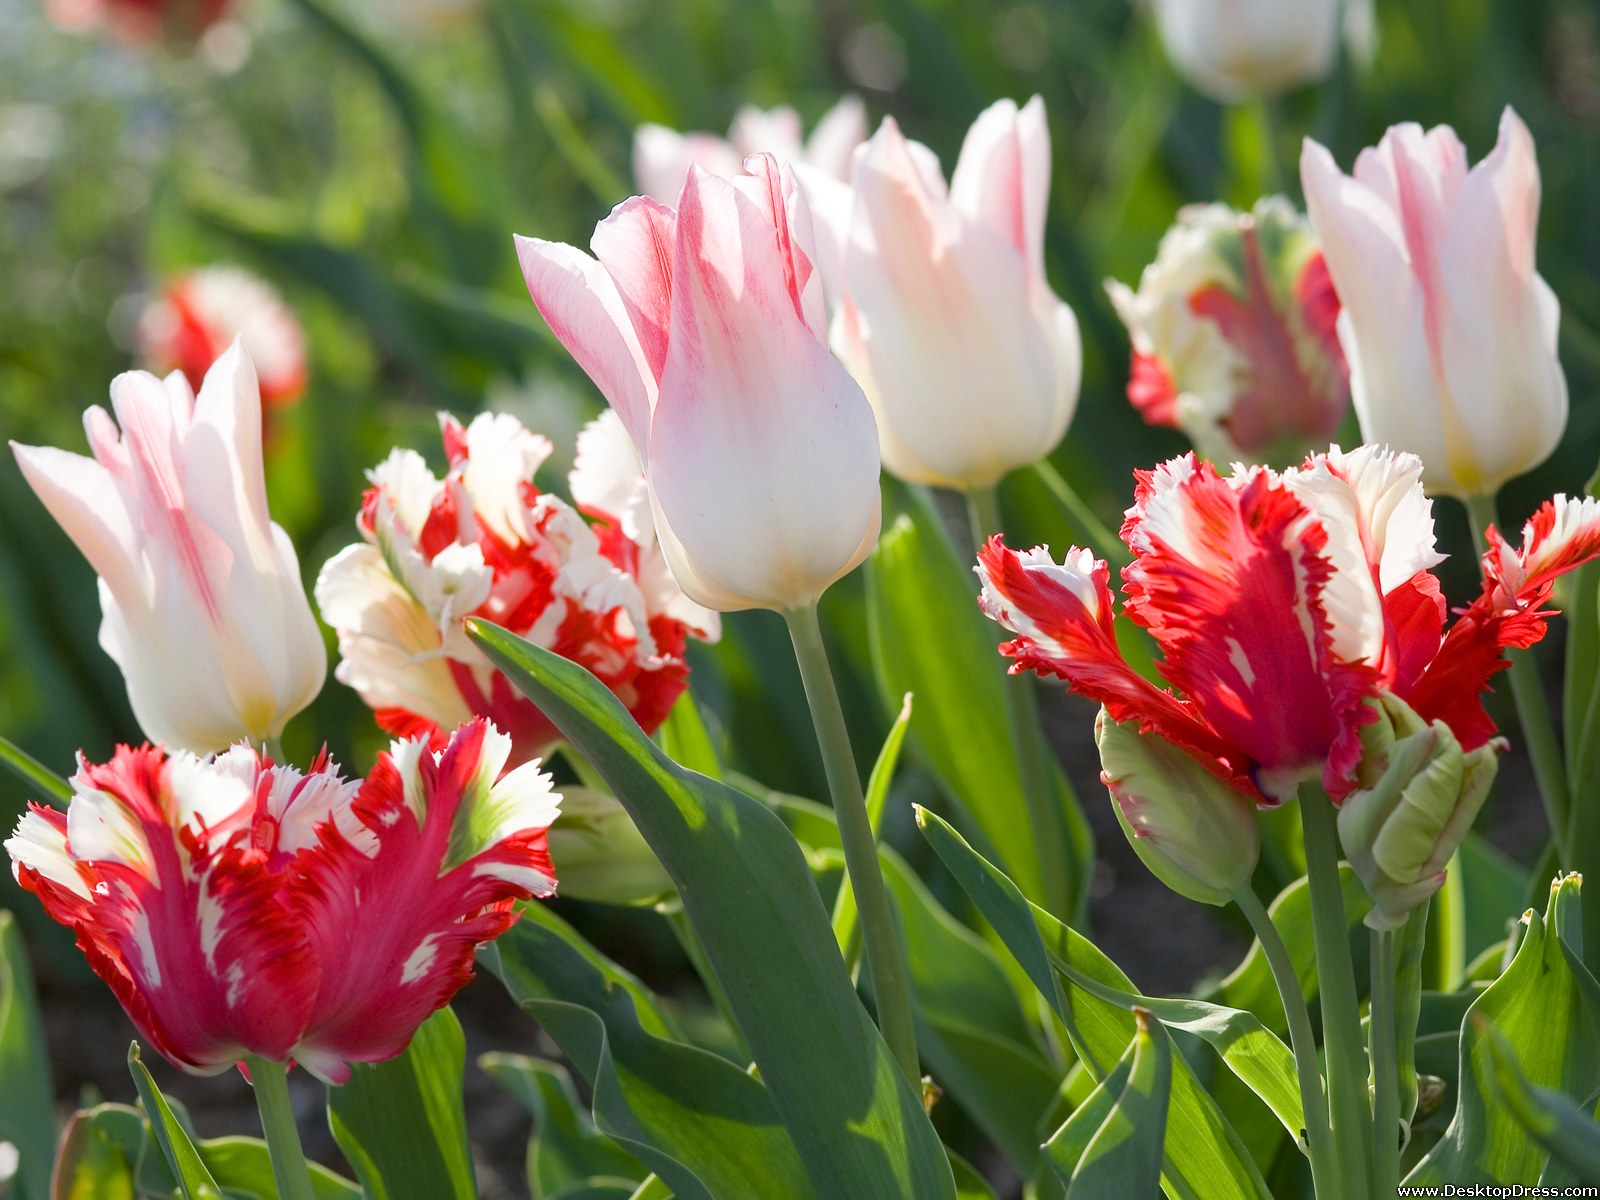 Desktop Wallpapers » Flowers Backgrounds » White and Red Tulips ...